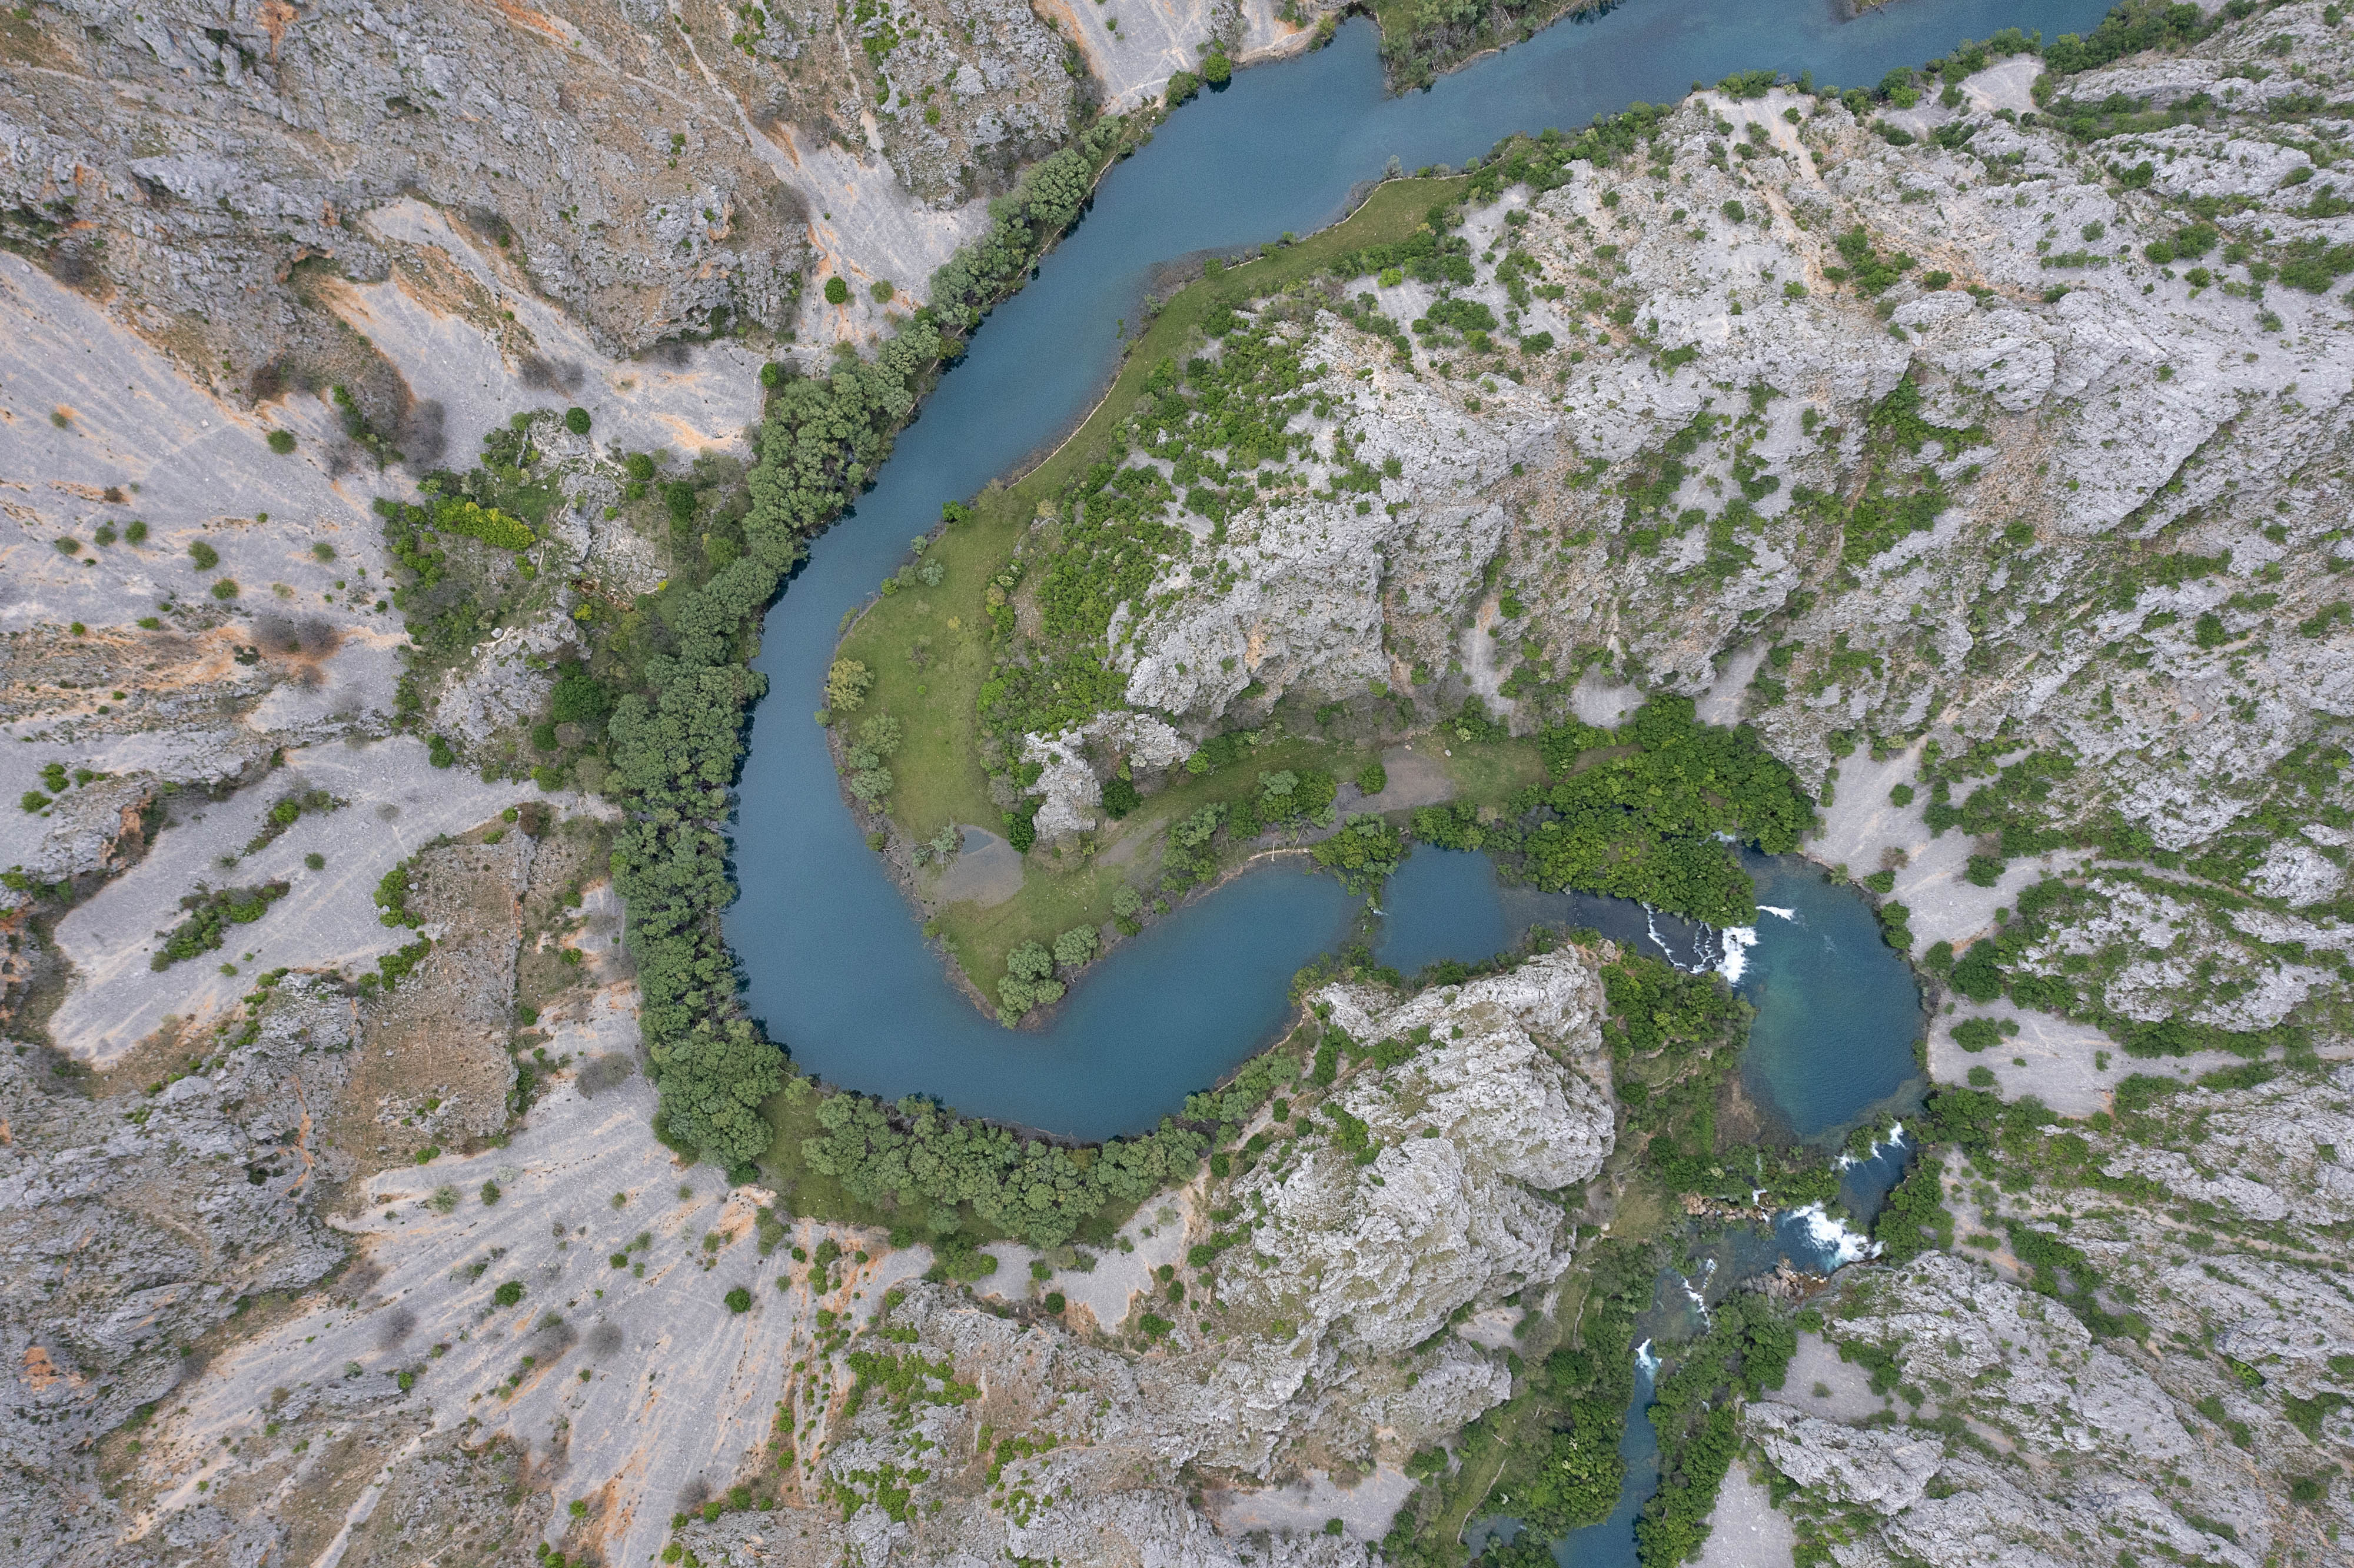 Aerial view looking straight down on a river that winds in an S curve through rocky terrain.